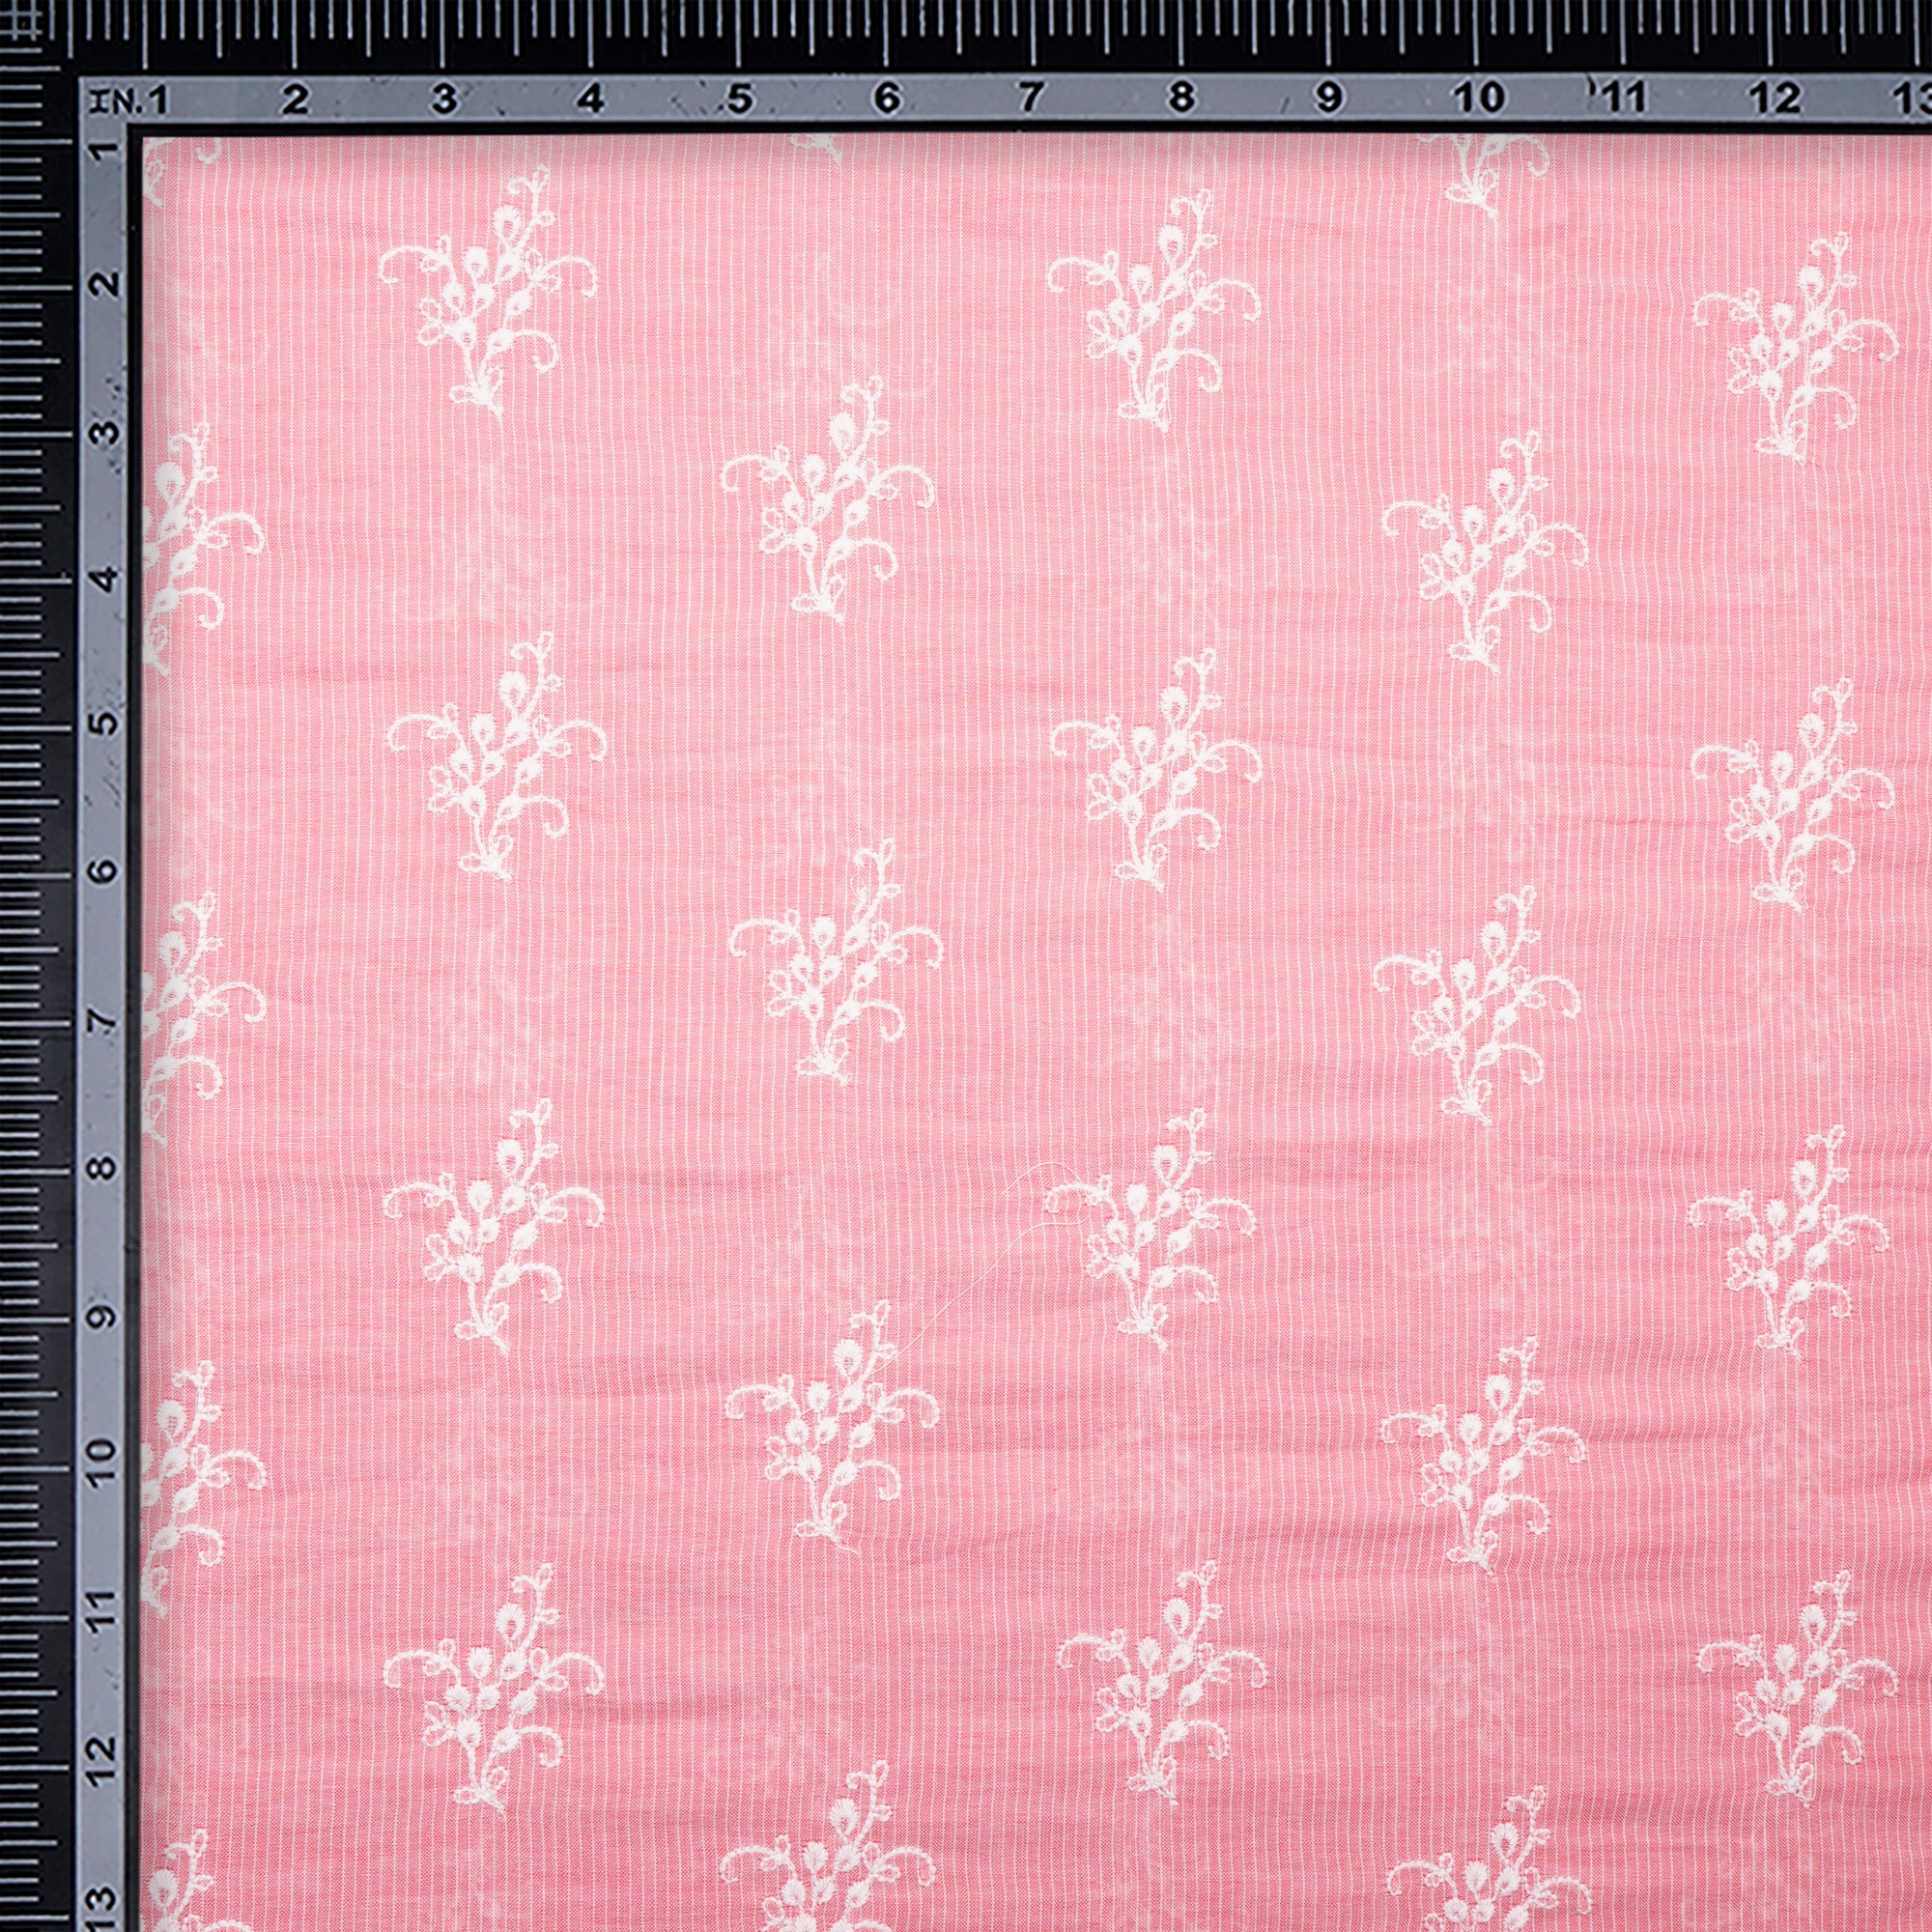 Blush Pink Floral Pattern Embroidered Voile Cotton Fabric